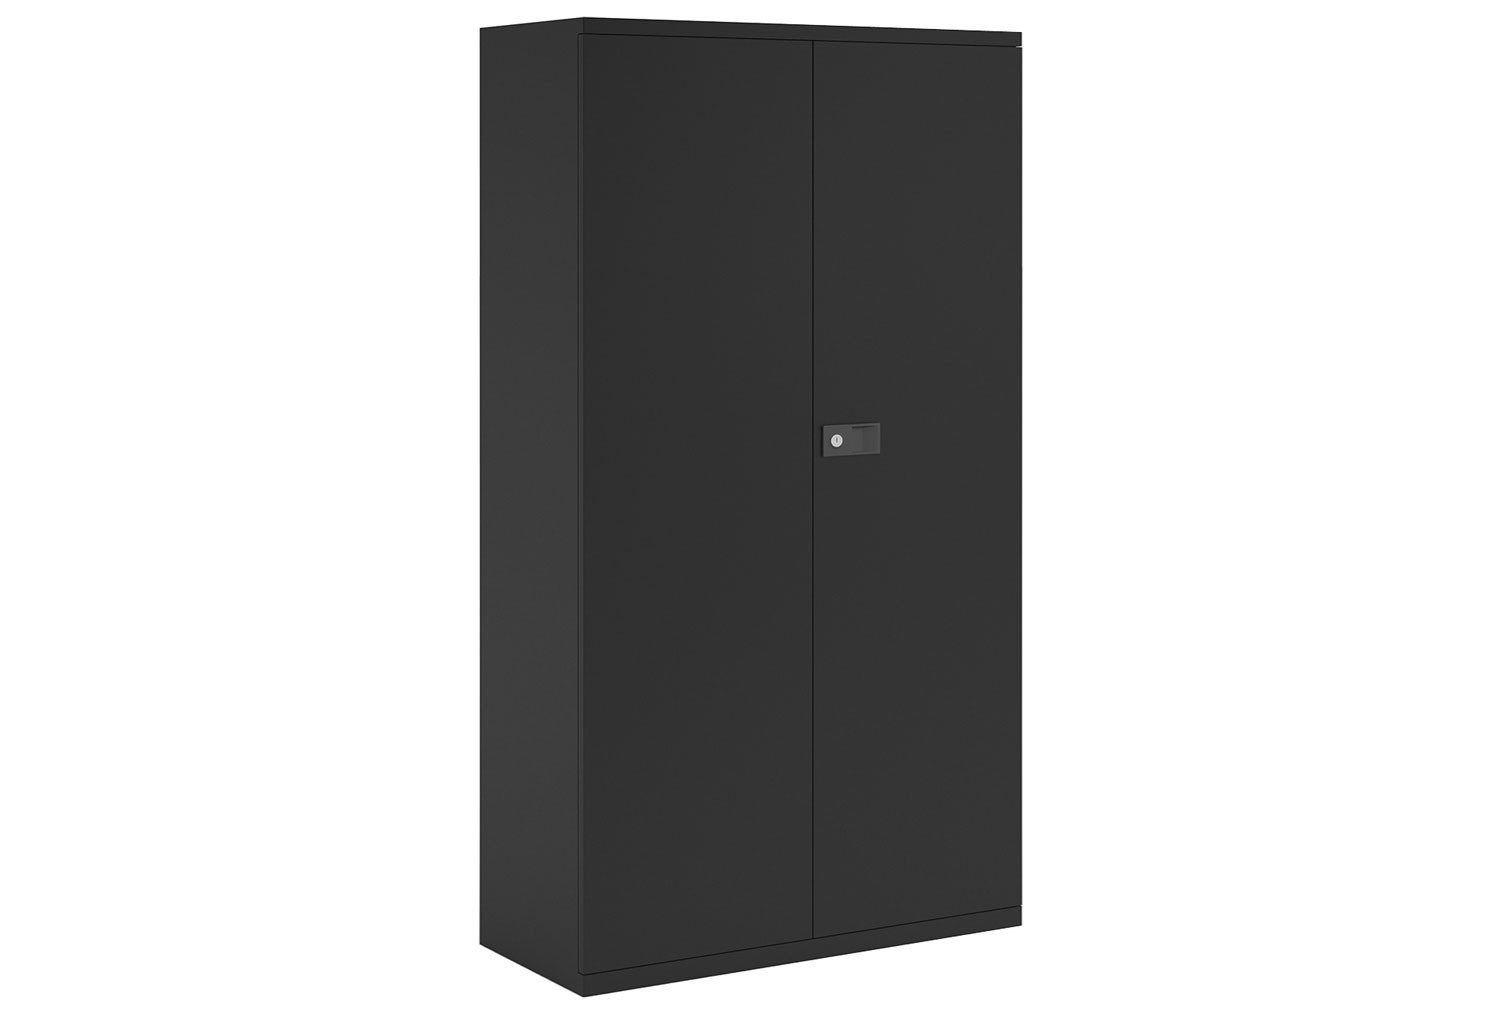 All Black Stationery Office Cupboards, 3 Shelf - 91wx40dx181h (cm), Express Delivery